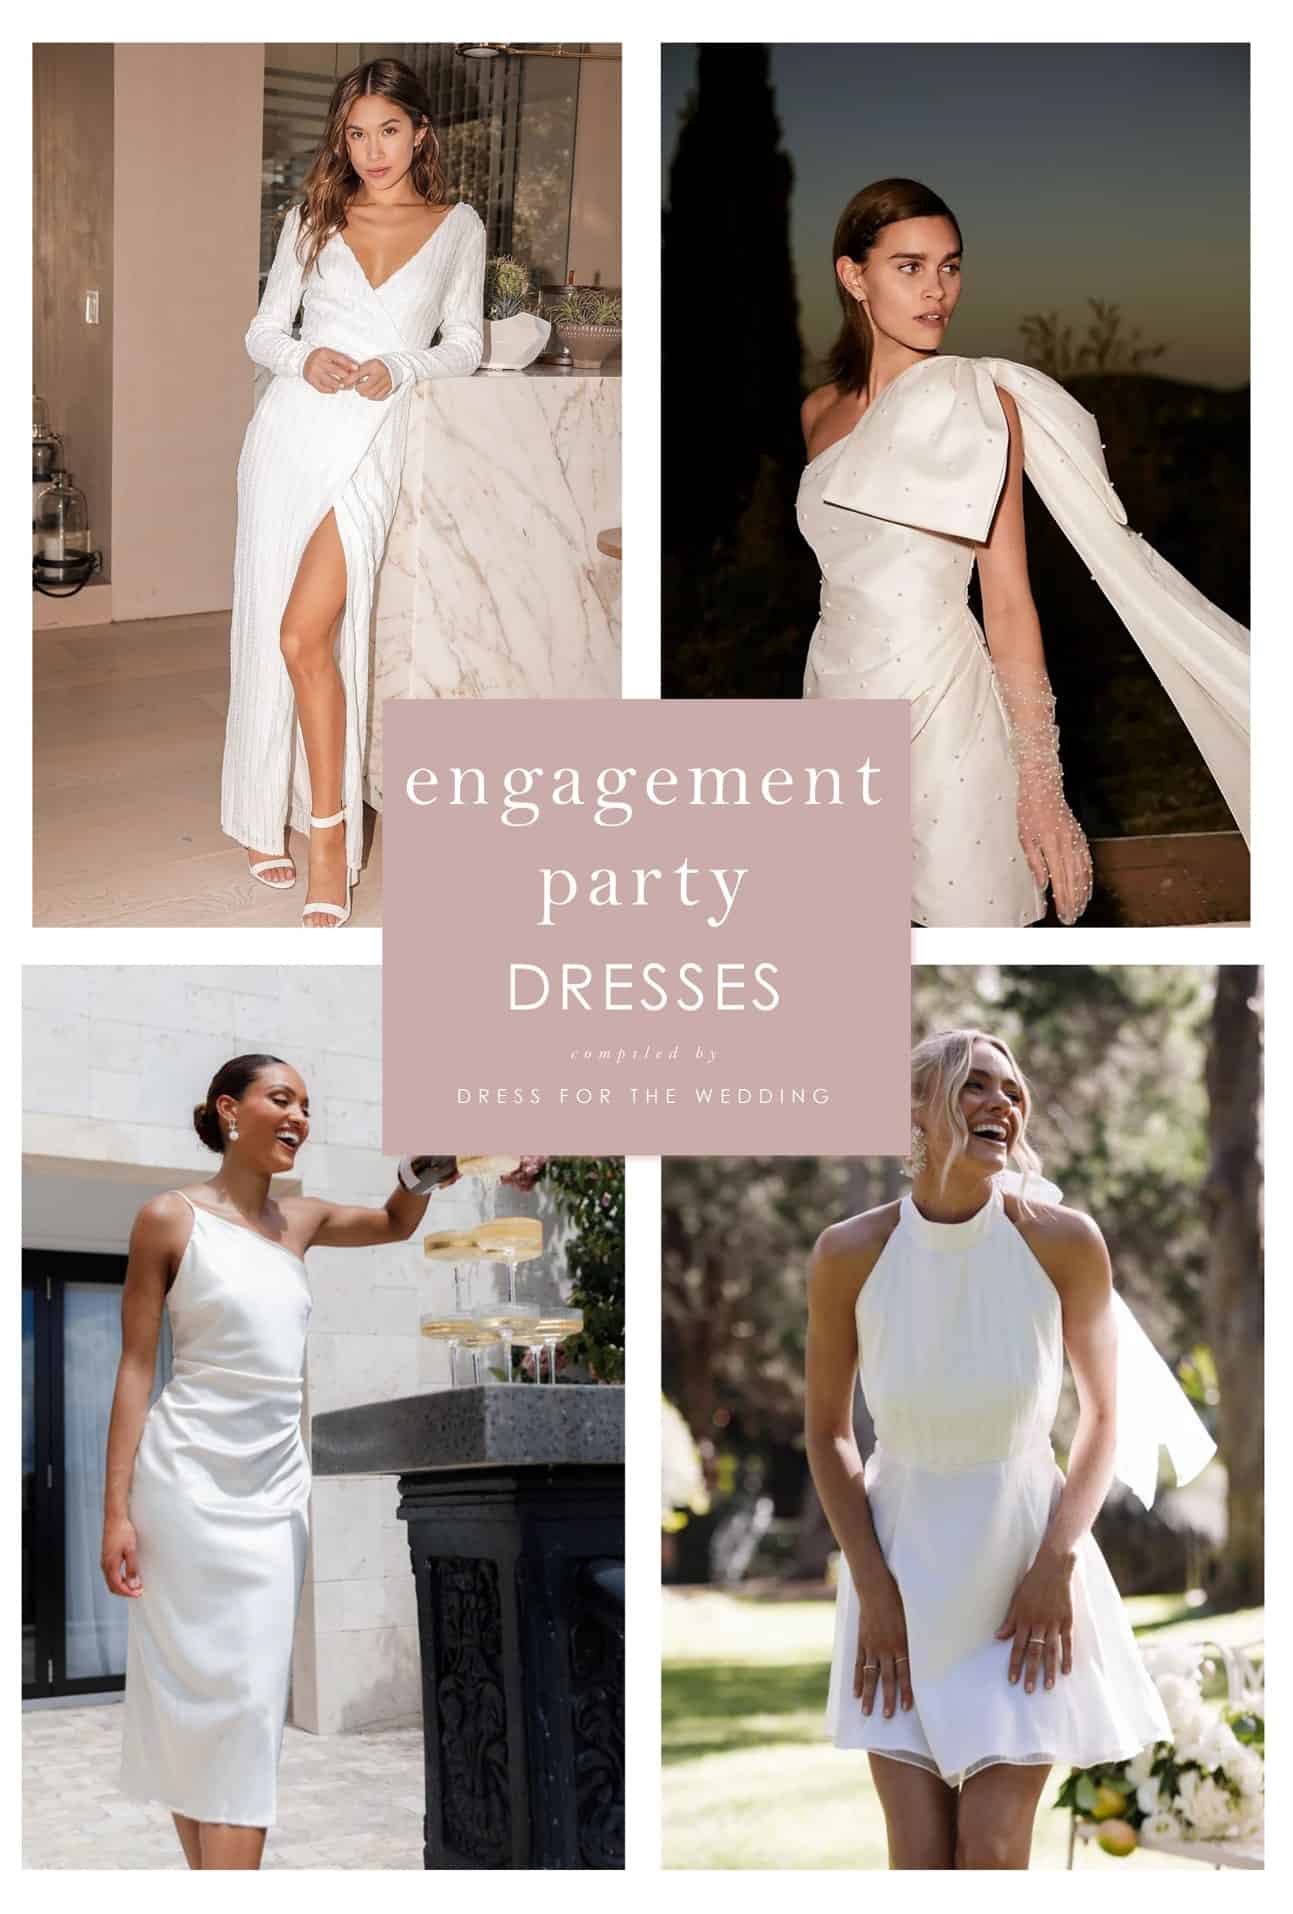 The Best Engagement Party Dresses for Brides to Be - Dress for the Wedding